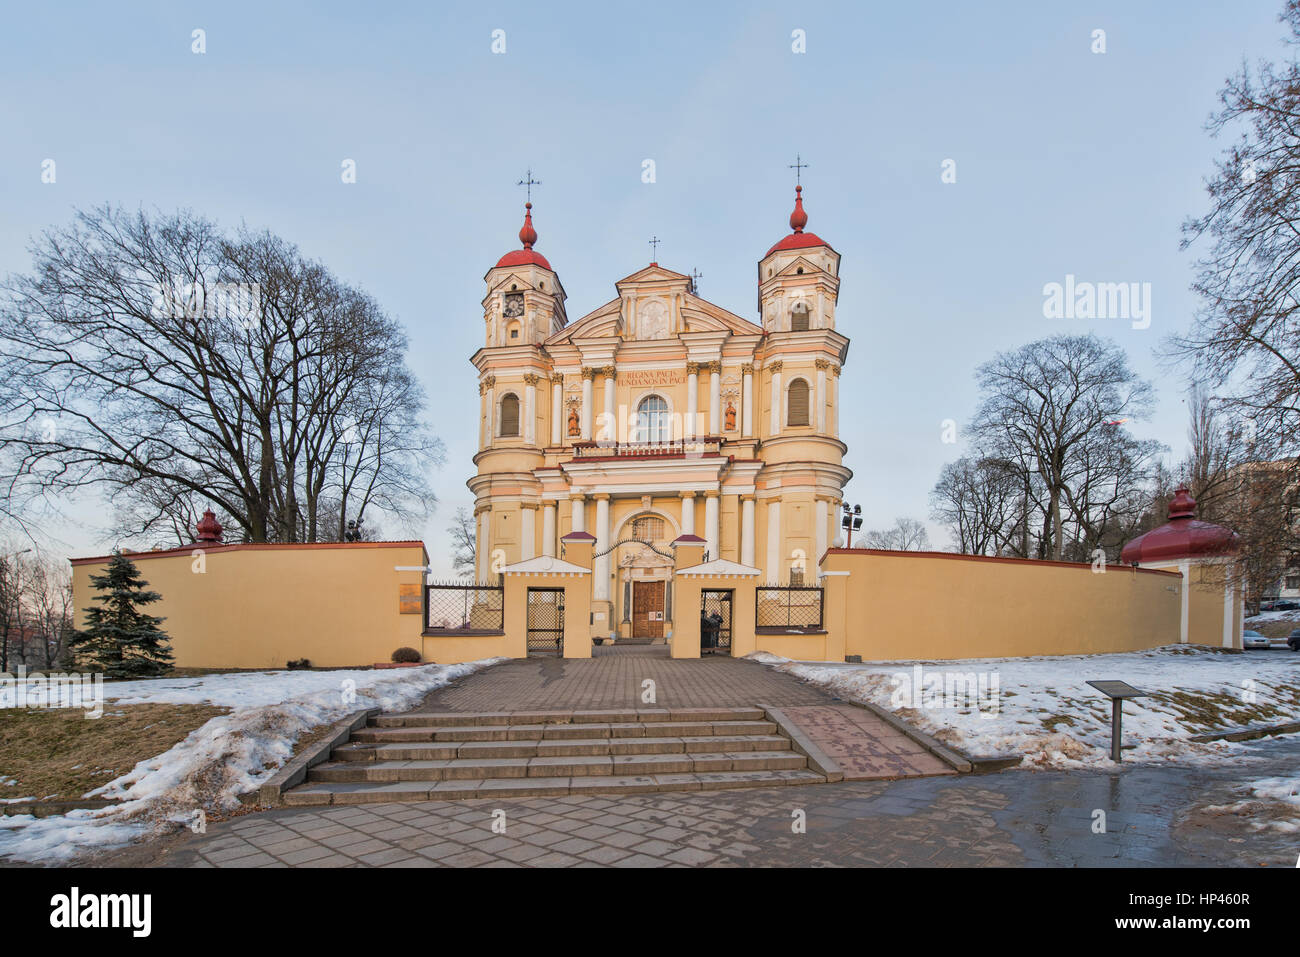 Church of St Peter and St Paul in Vilnius in Lithuania. Travel places. Landmark. Stock Photo